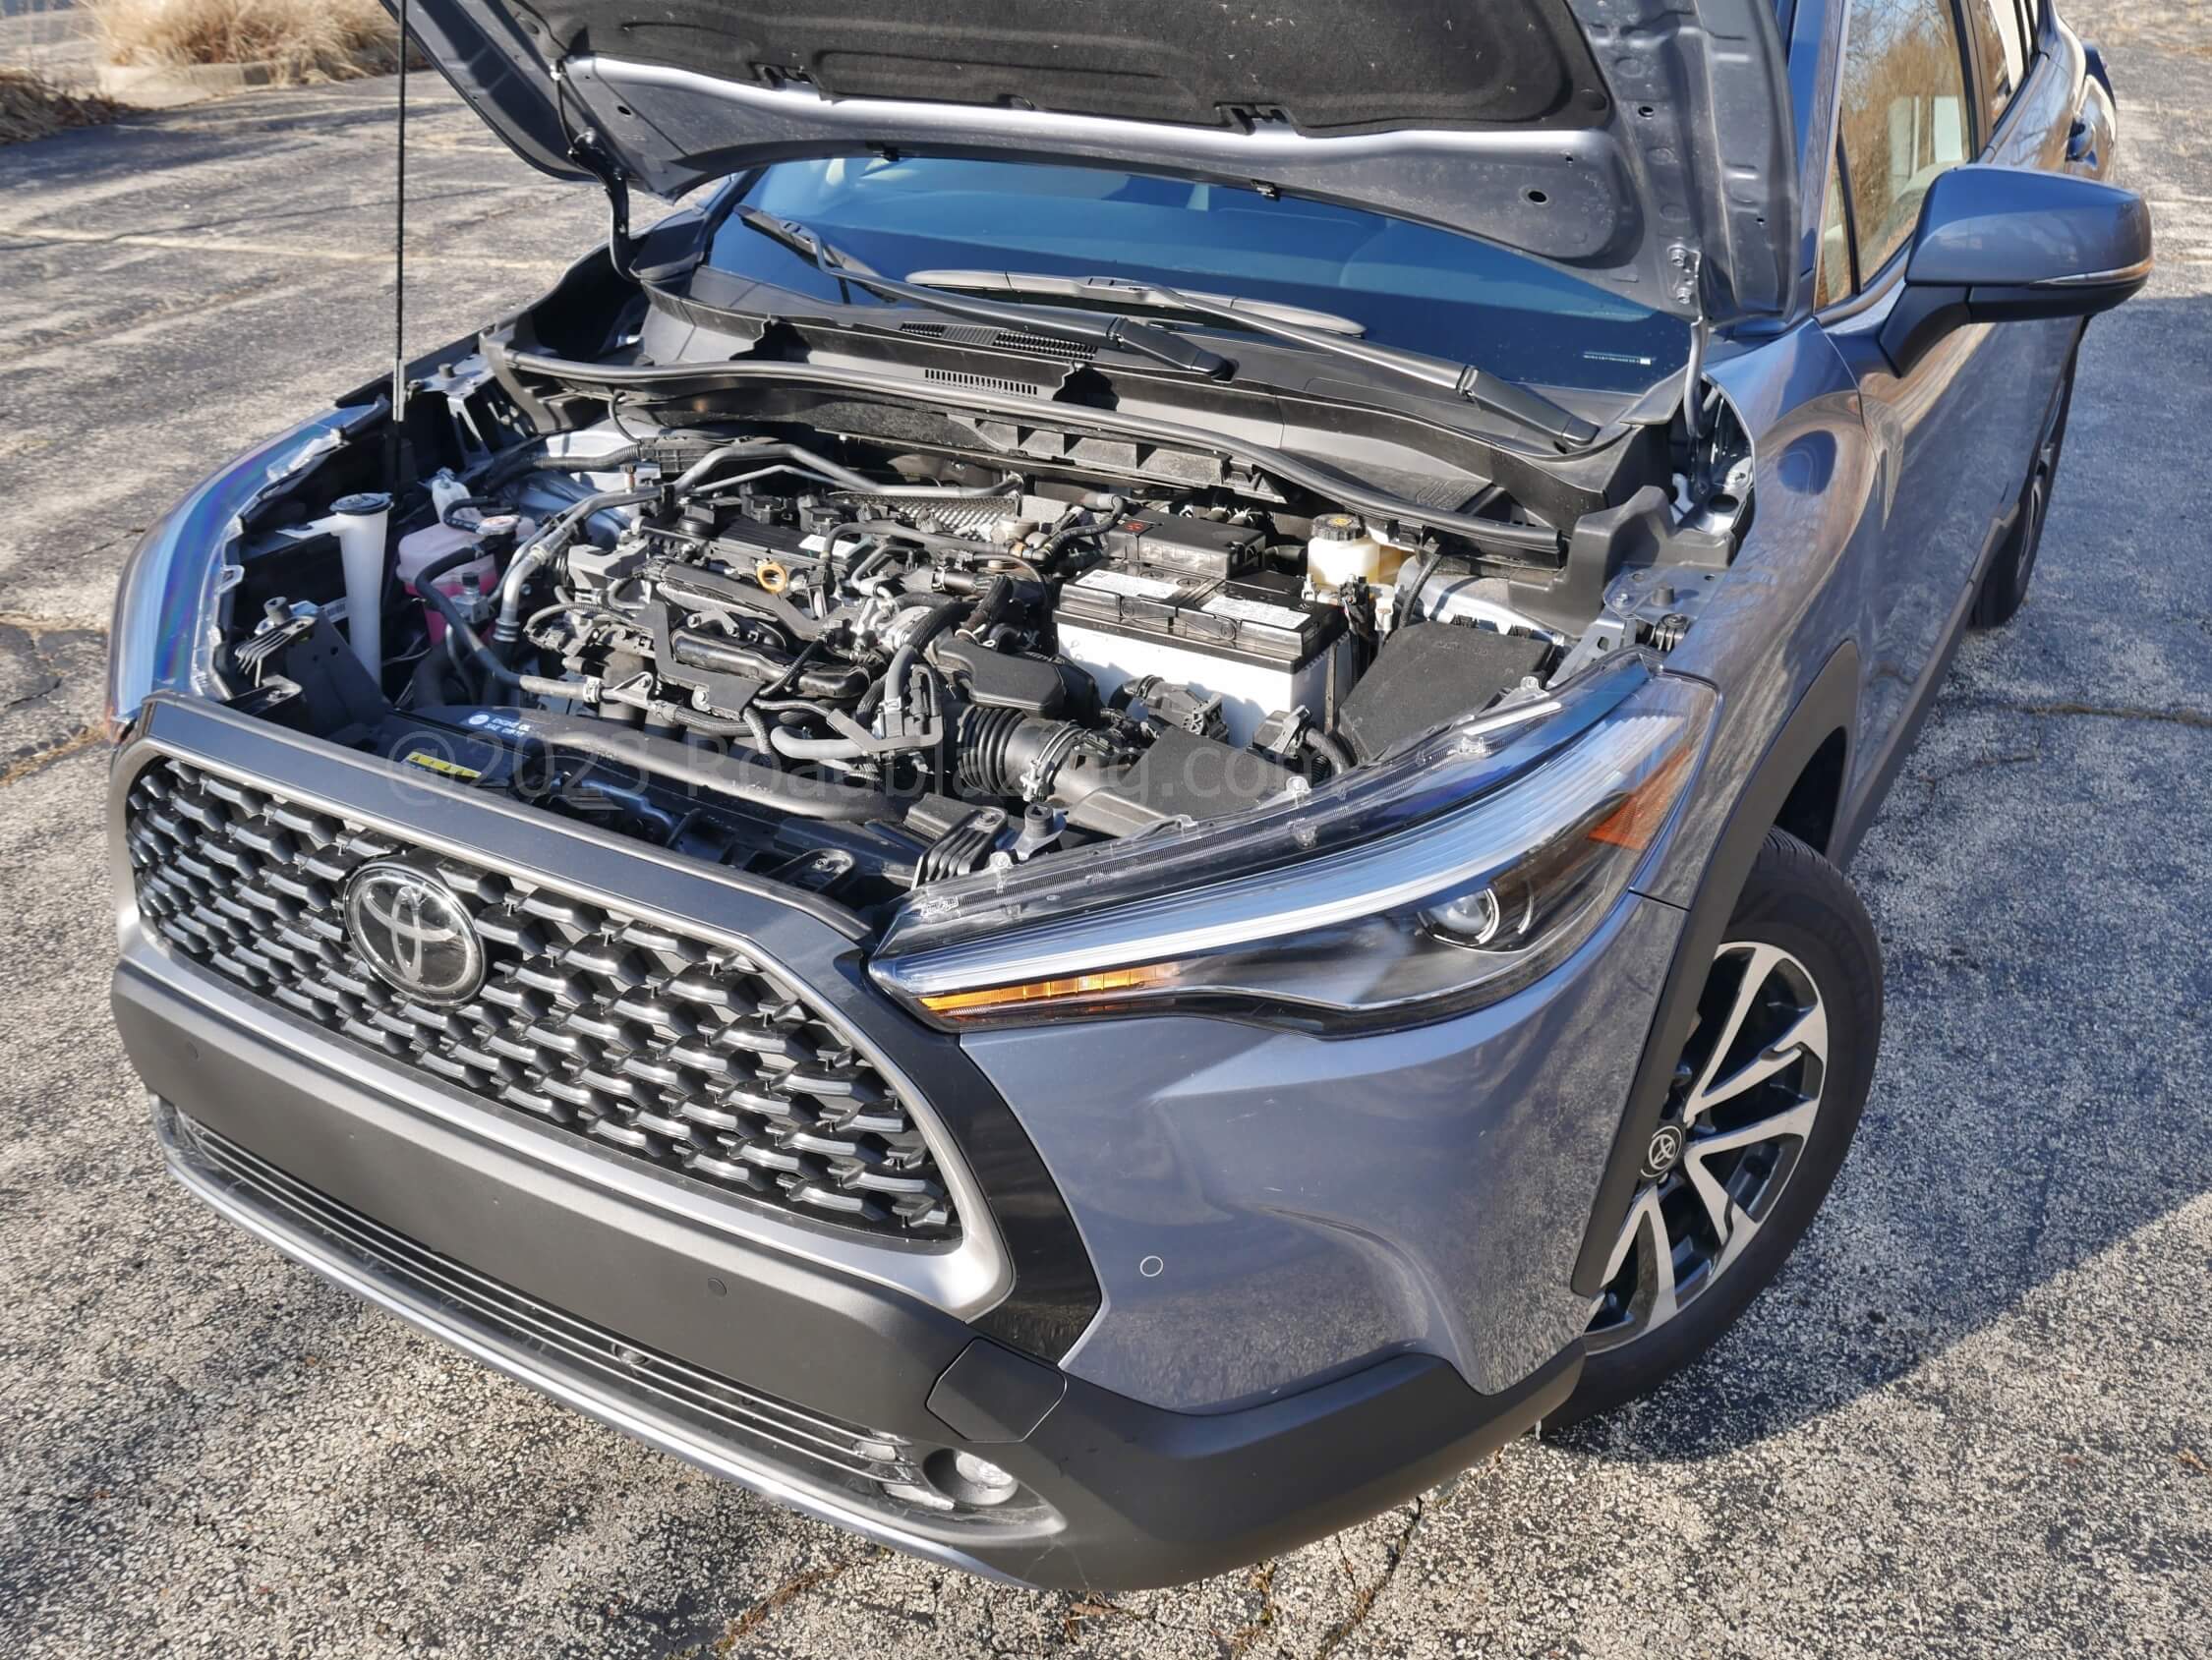 2022 Toyota Corolla Cross XLE AWD: 169 hp twin-cam four pot powerplant gets noisy underway. Mated to CVT and AWD = 27 MPG.